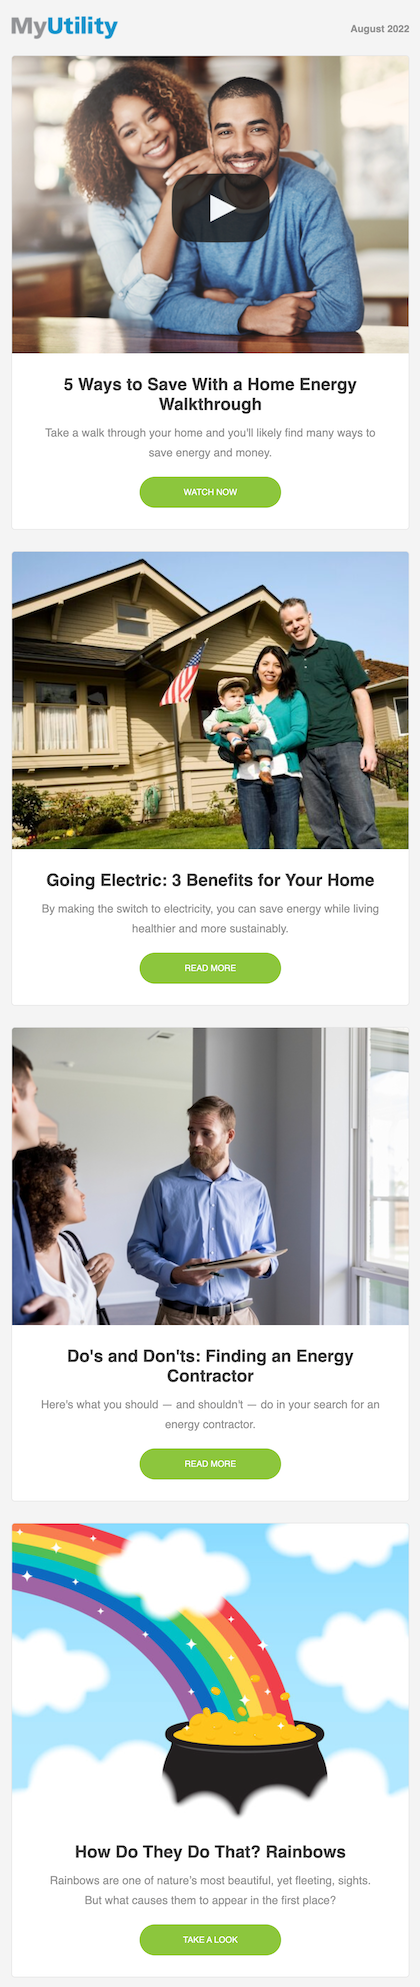 Example of energy utility email newsletter with video content in a series